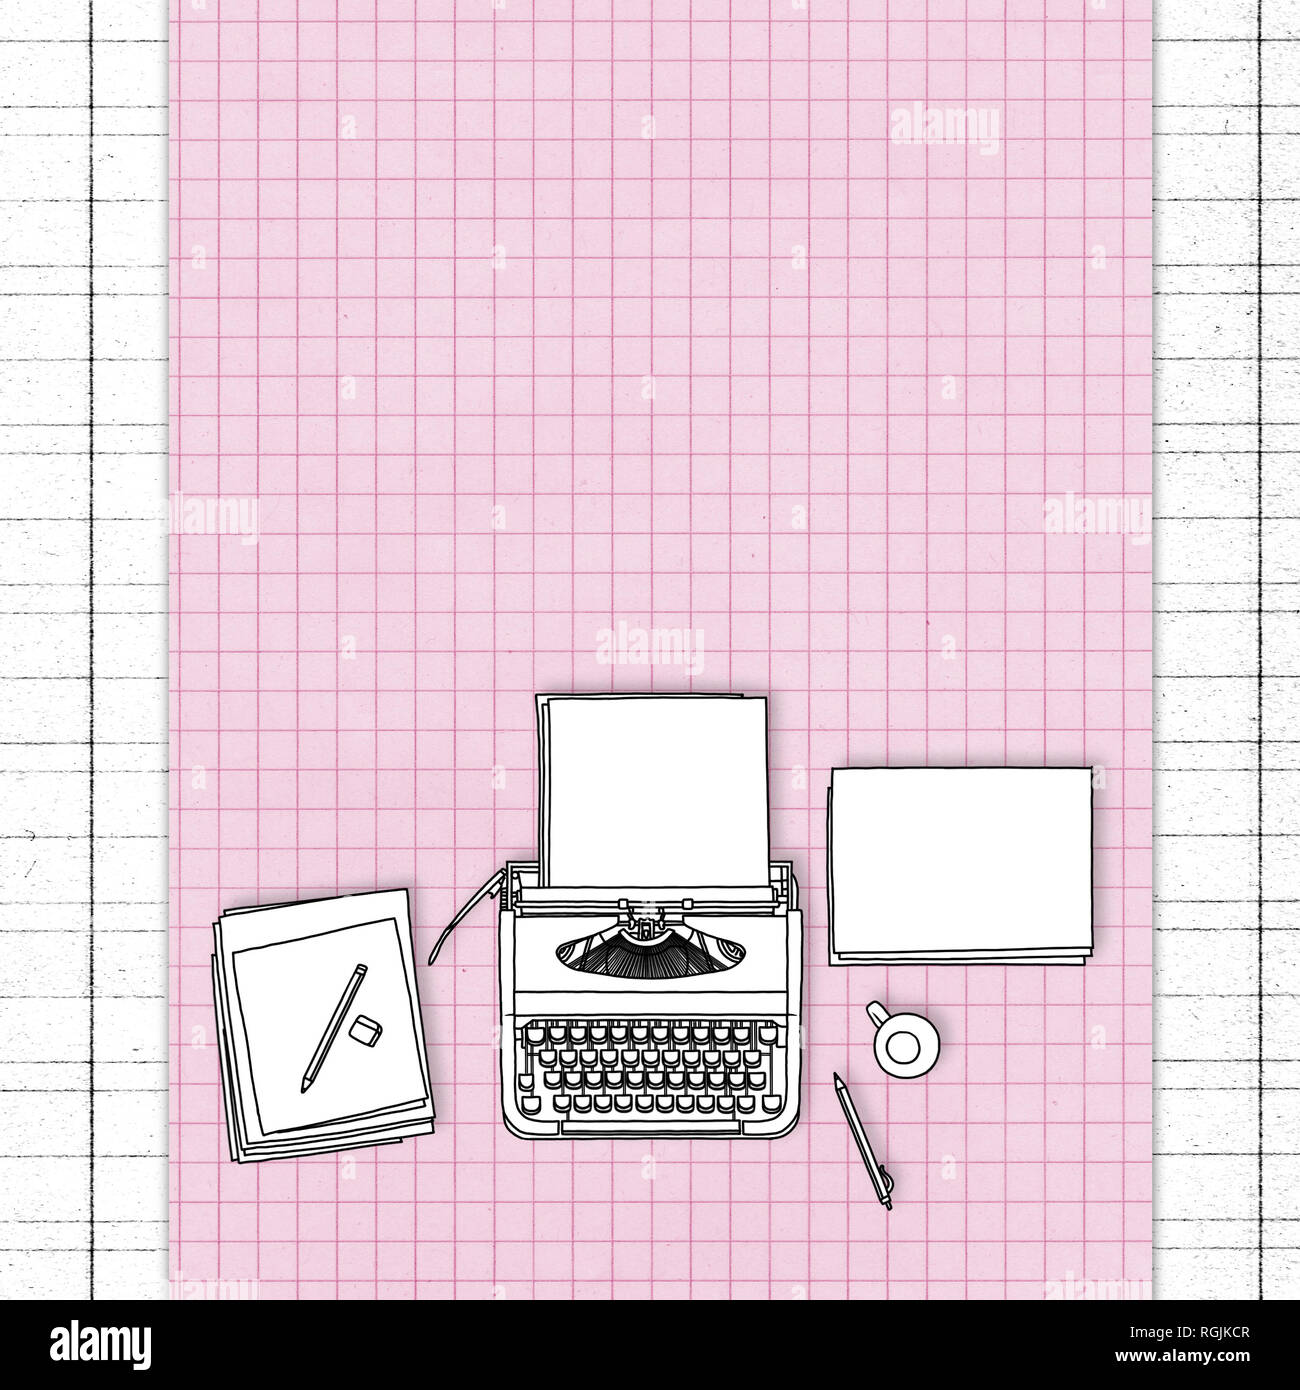 Illustration sketch drawing of typewriter with stationery on pink square blank paper sheet frame Stock Photo